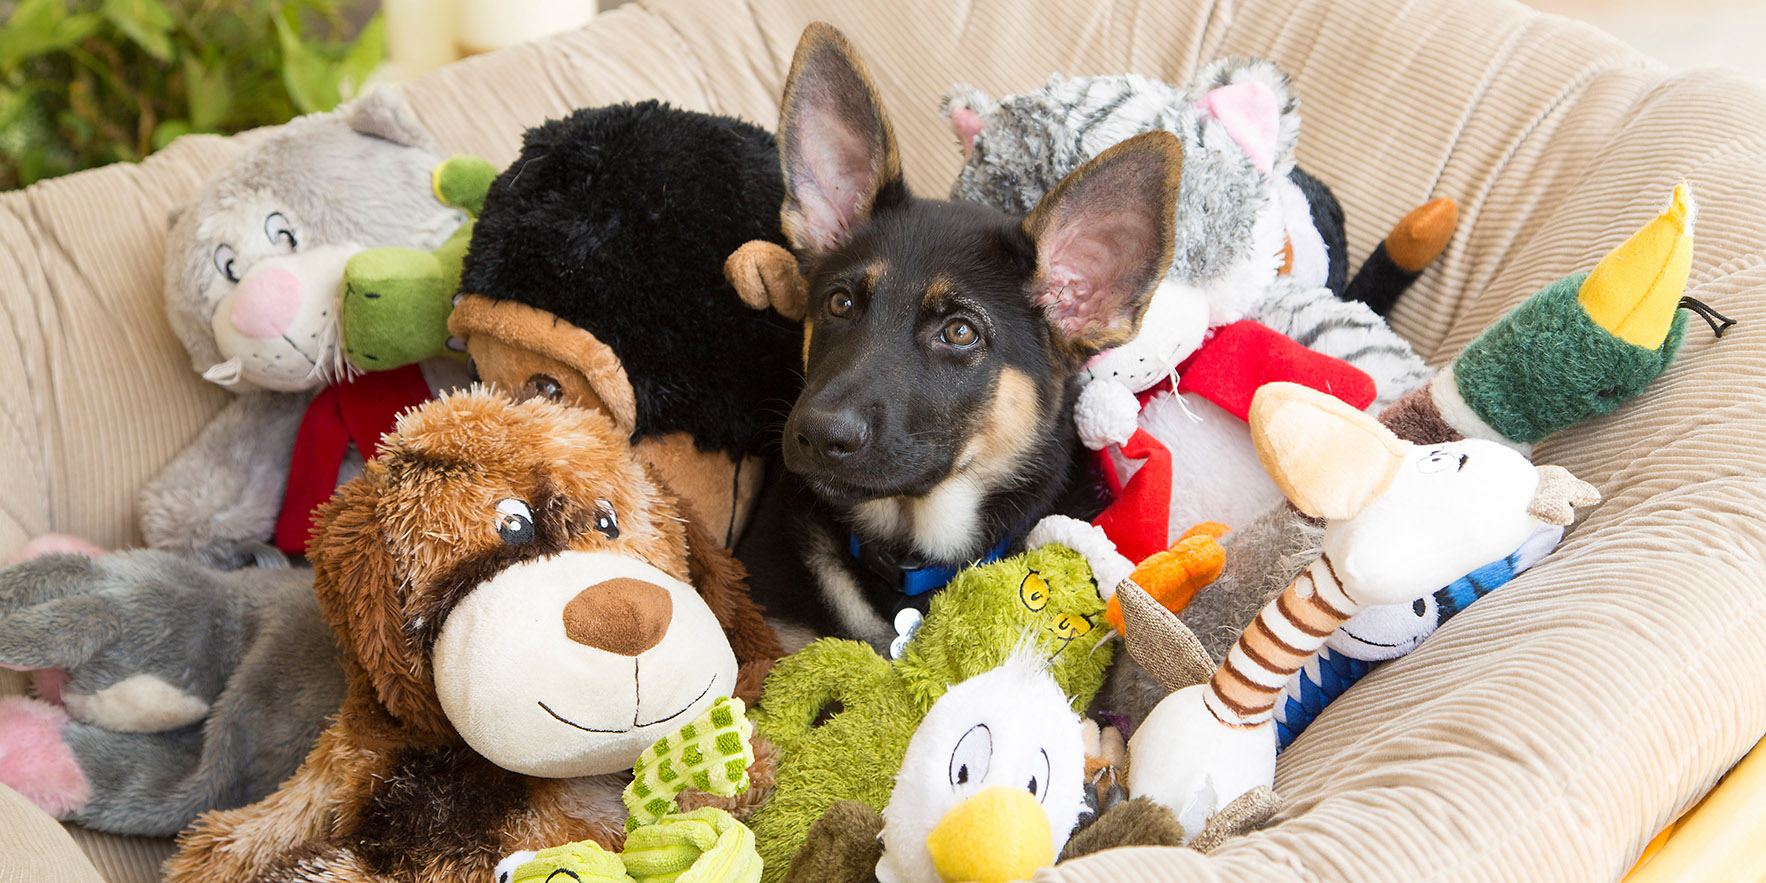 German Shepherd puppy surrounded by dog toys on a dog bed.